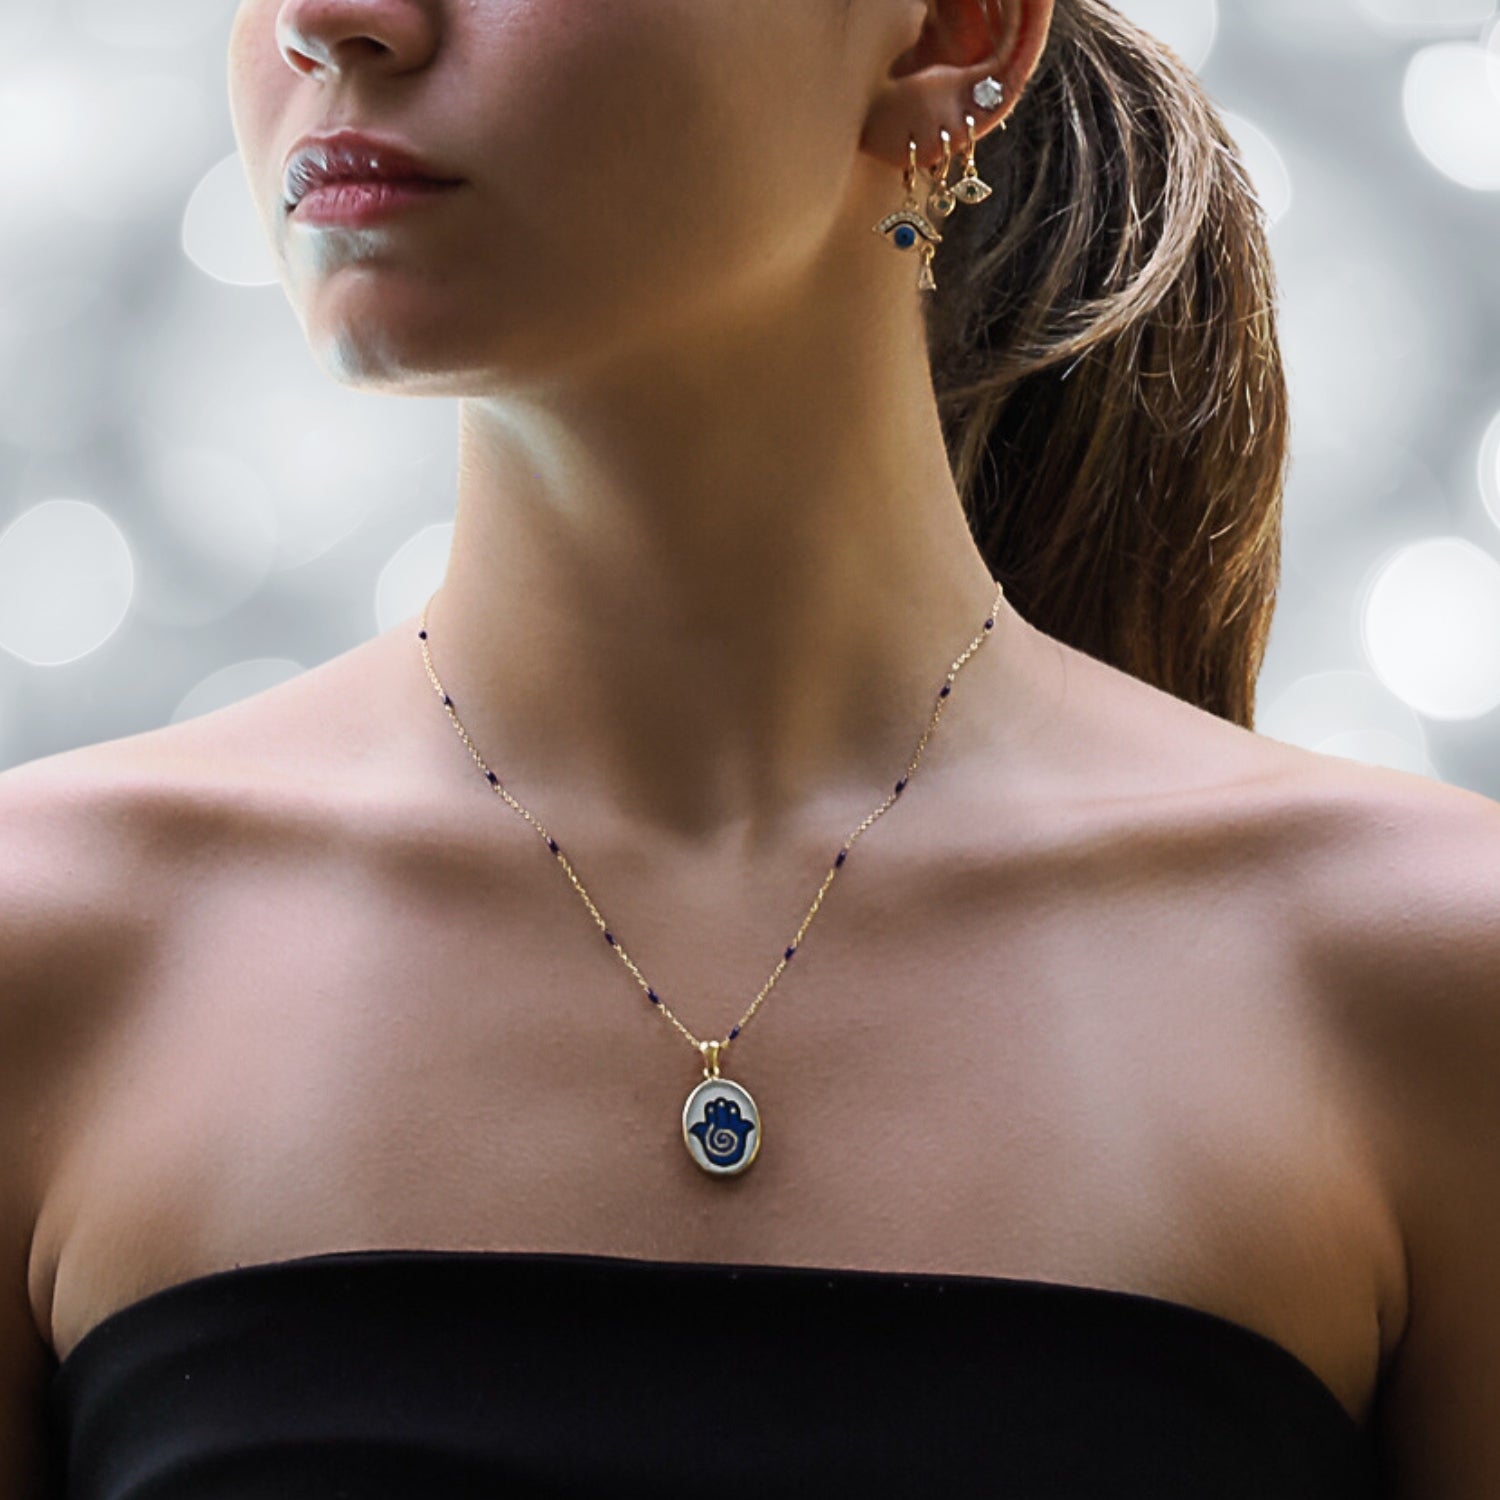 Model Wearing a Sterling Silver and Gold Hamsa Hand Necklace - A Symbol of Protection.